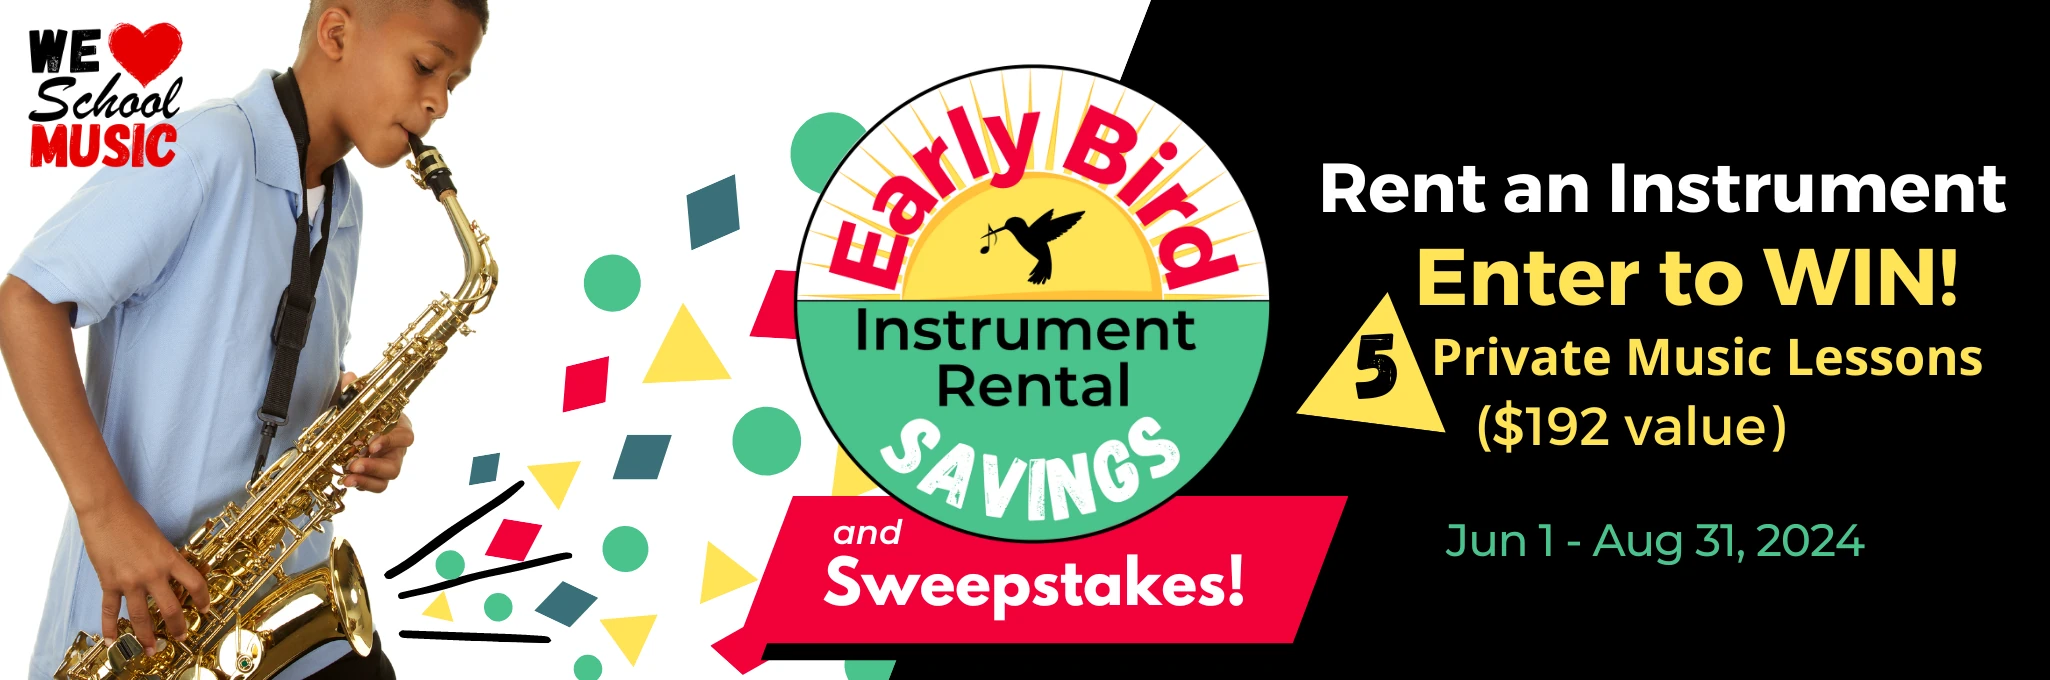 With Early Bird Savings, pay the 9-month rate and keep the instrument through June 2025.